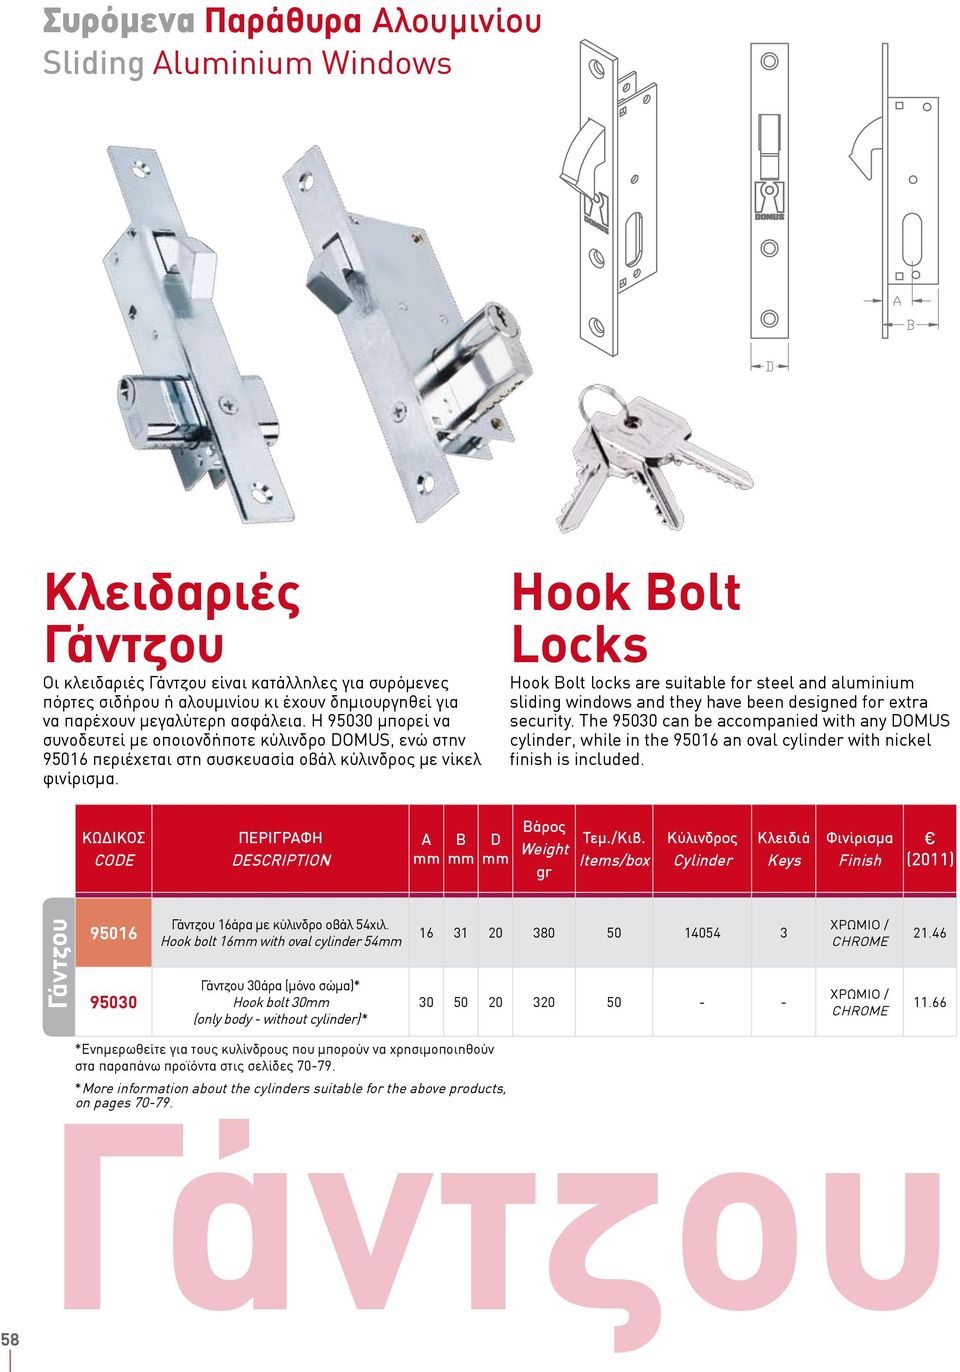 Hook Bolt Locks Hook Bolt locks are suitable for steel and aluminium sliding windows and they have been designed for extra security.